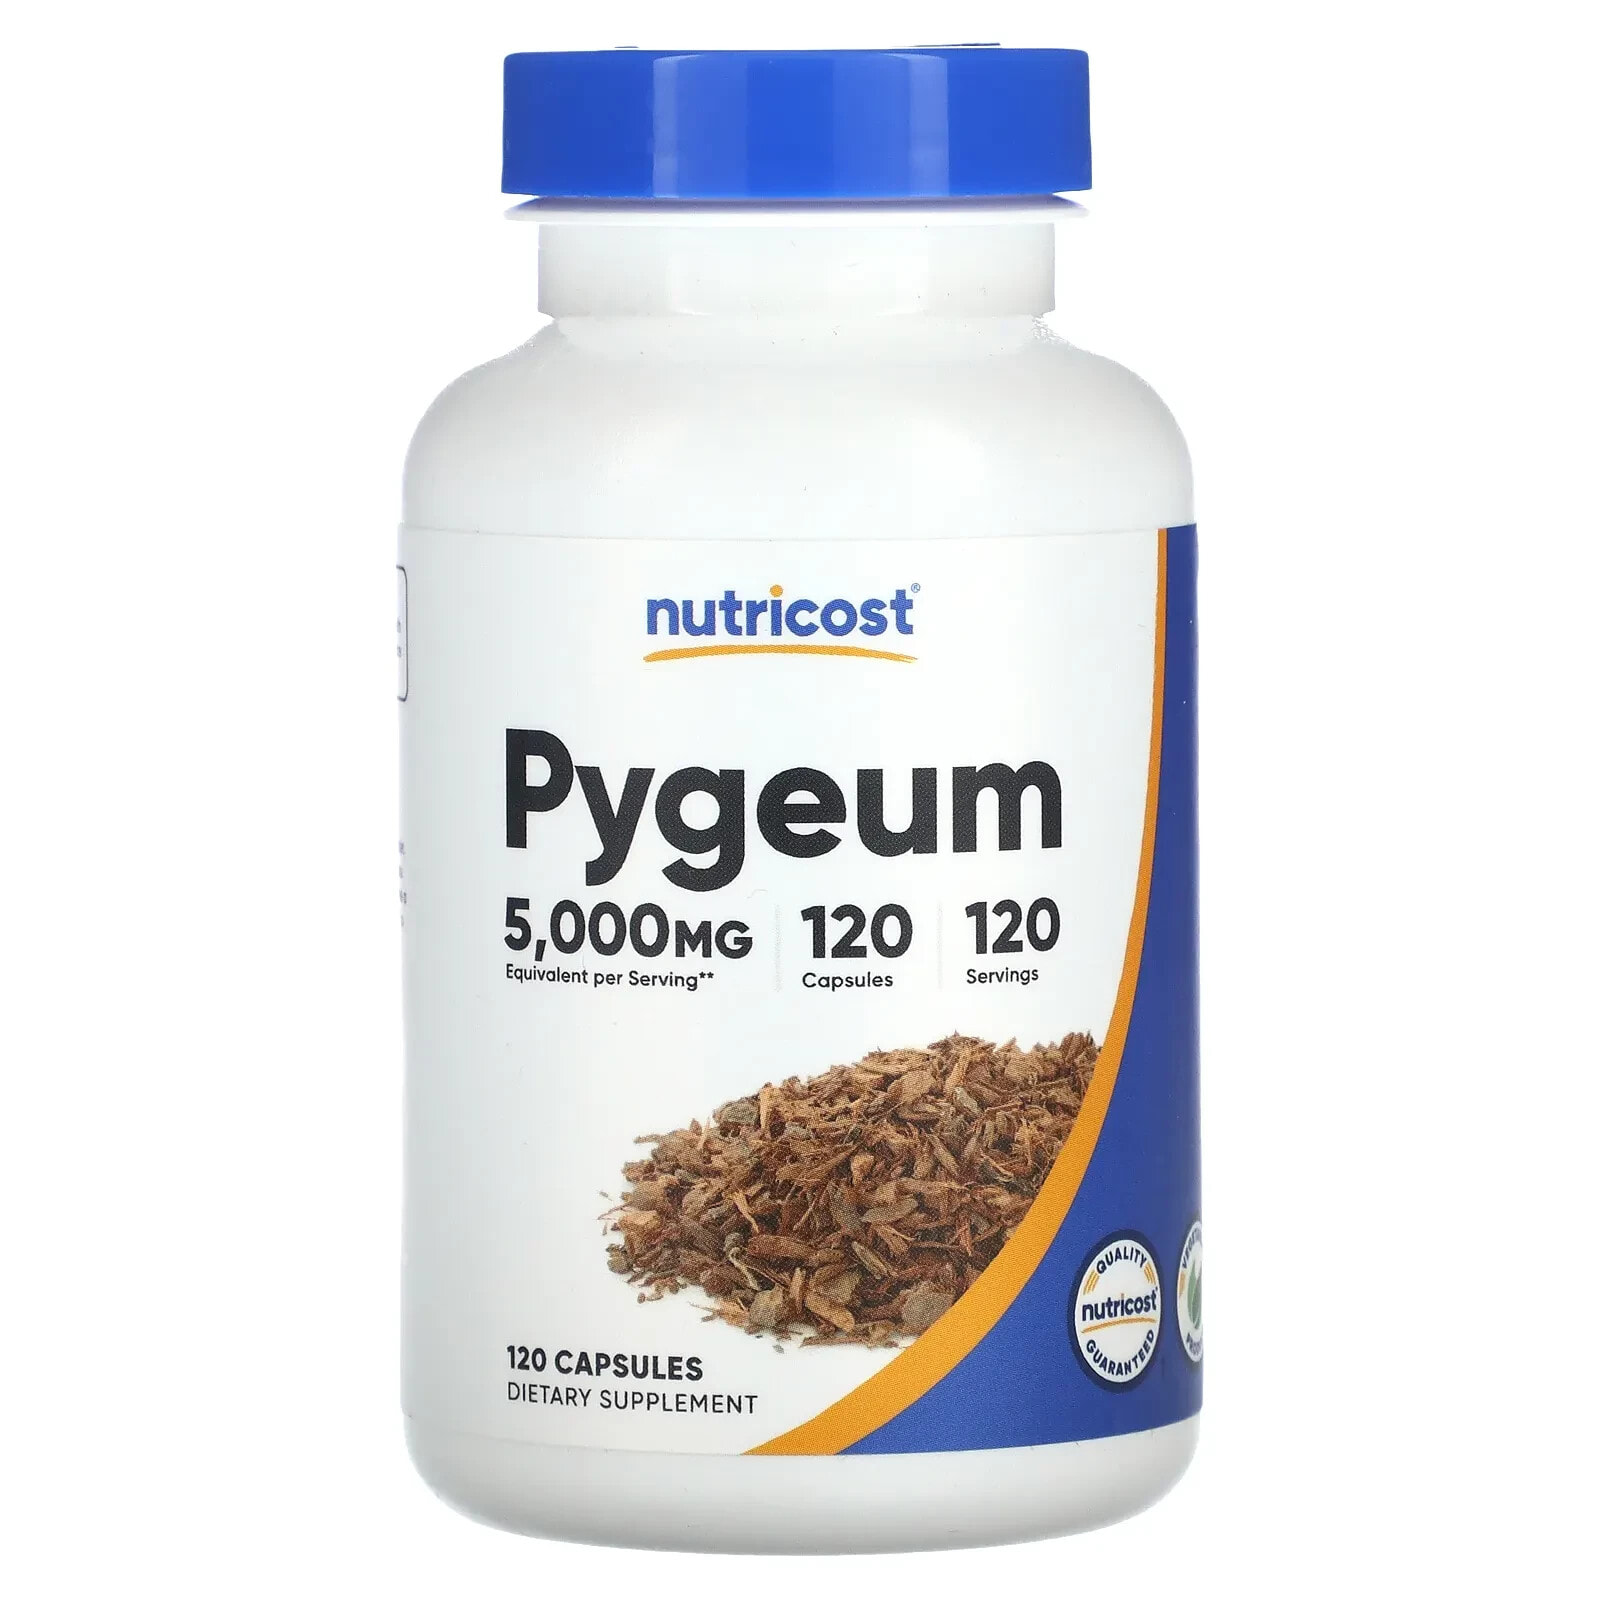 Nutricost, Pygeum, 5,000 mg, 120 Capsules